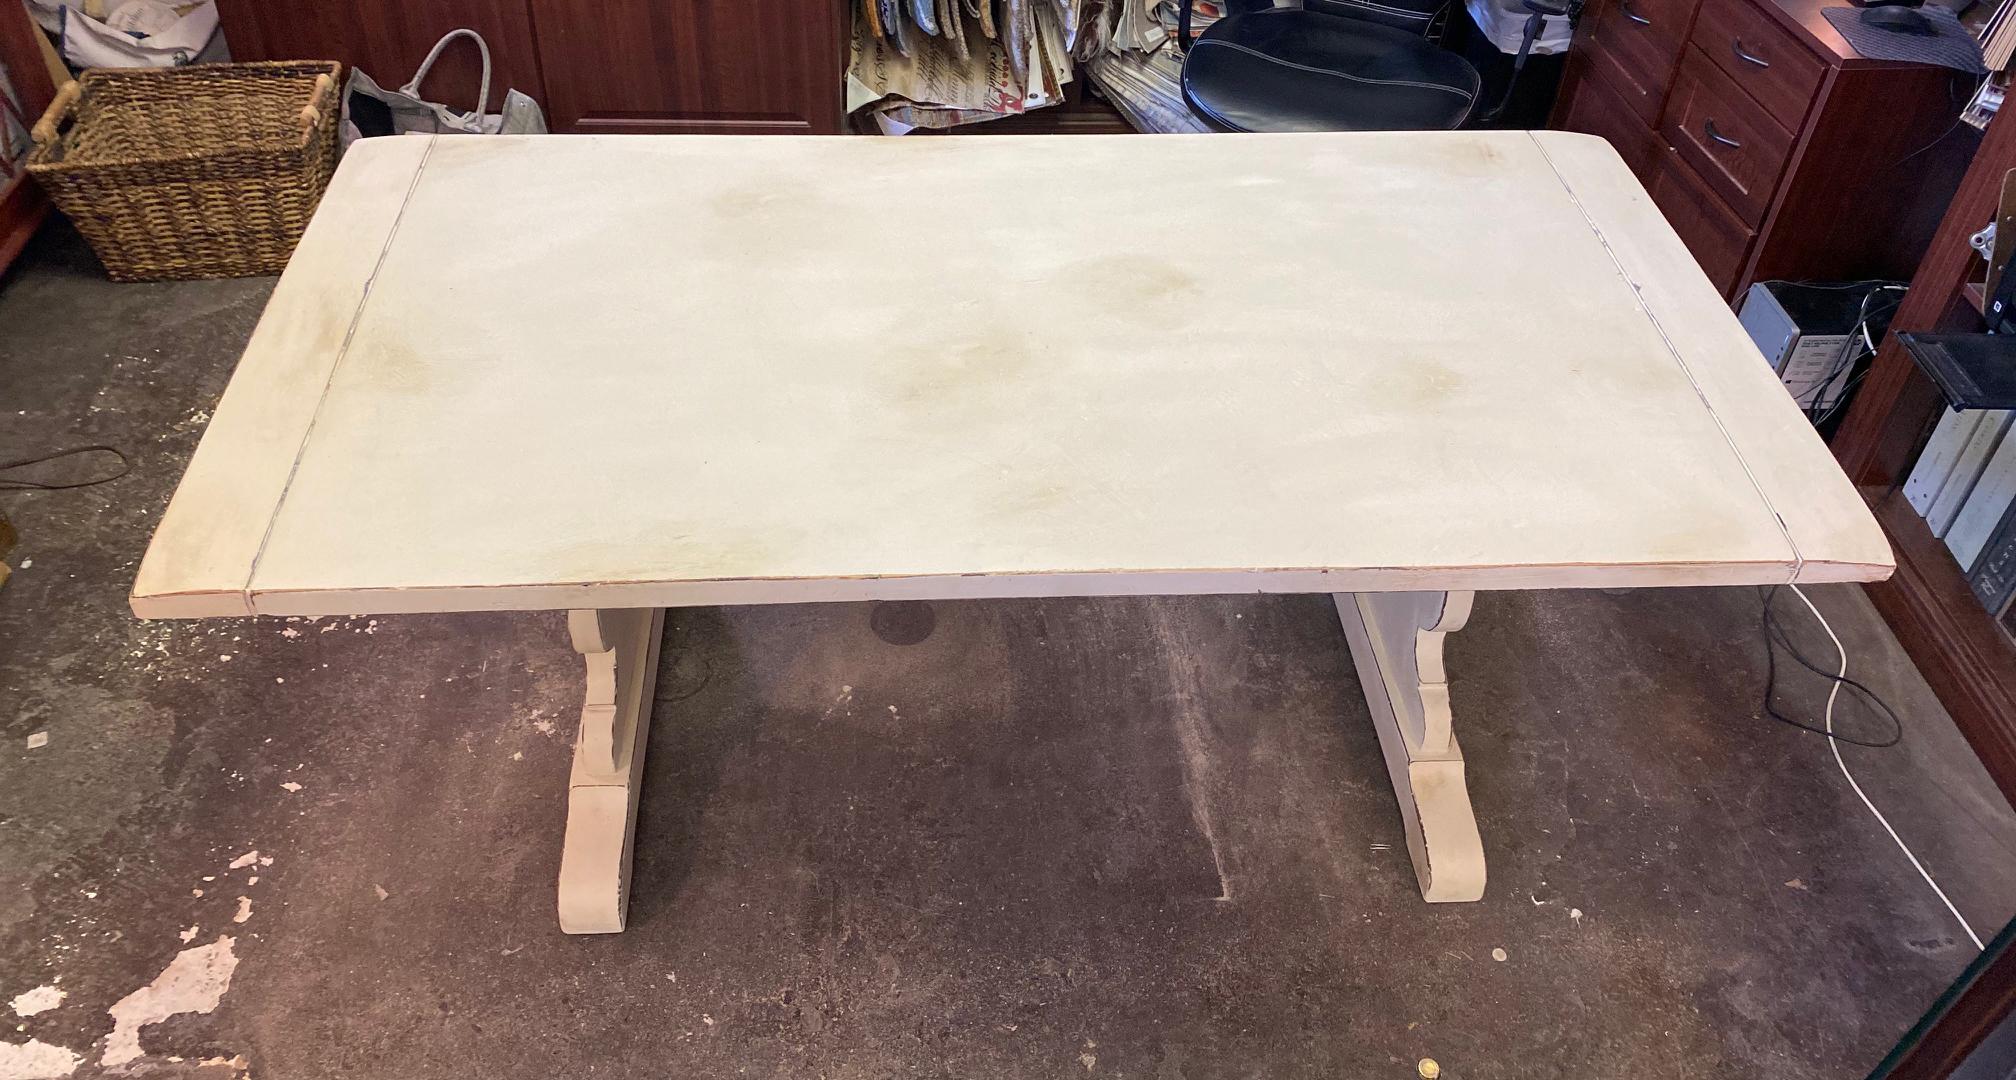 Vintage kitchen/dining table. Solid oak and recently painted in a distressed cream and finished in a variation of clear and dark wax for added depth. This finish can be cleaned with a damp cloth and is very durable for everyday use. Please see